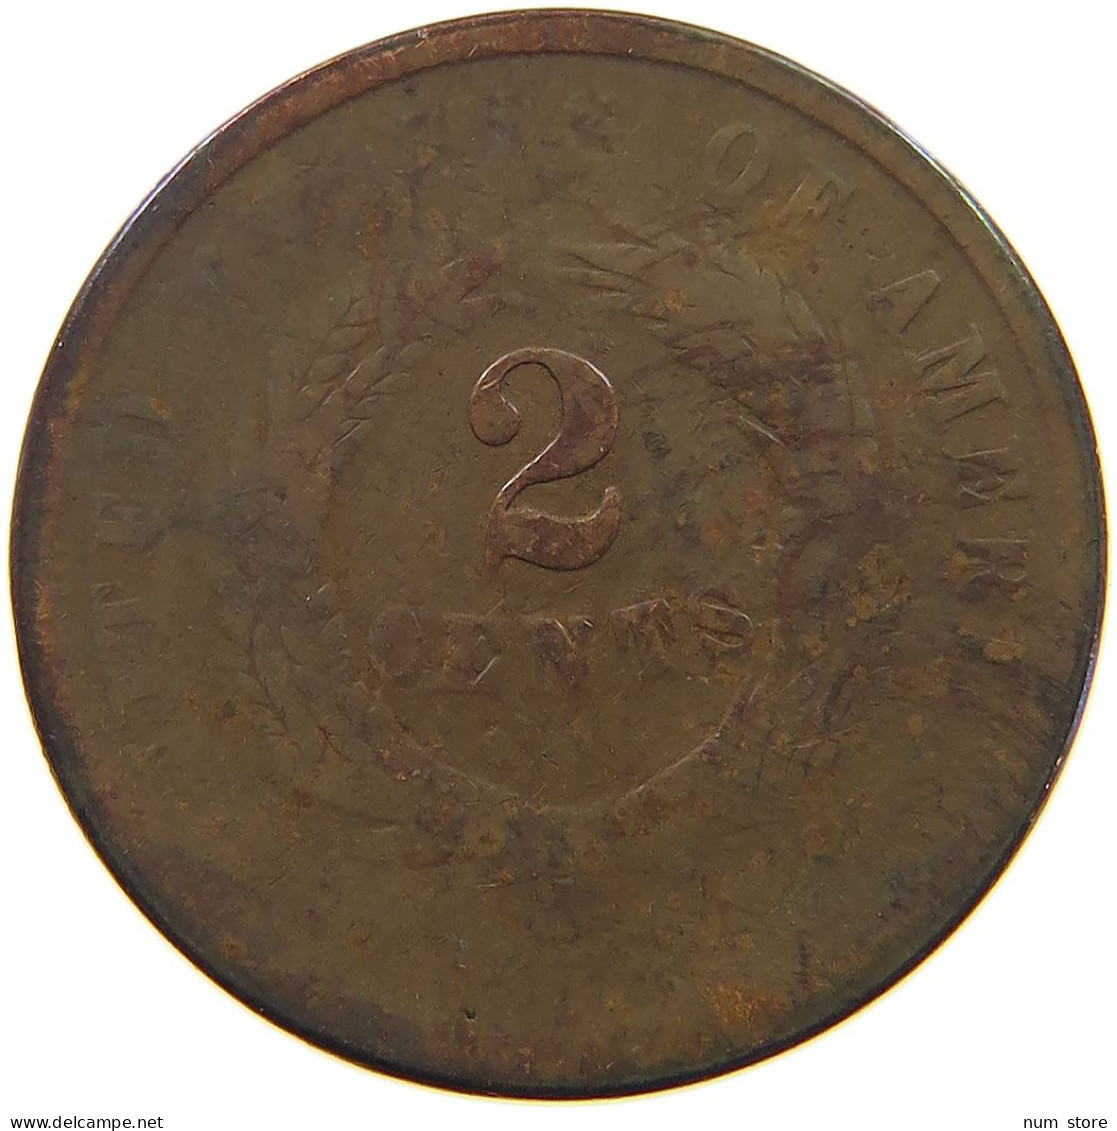 UNITED STATES OF AMERICA 2 CENTS 1864  #c079 0131 - 2, 3 & 20 Cent